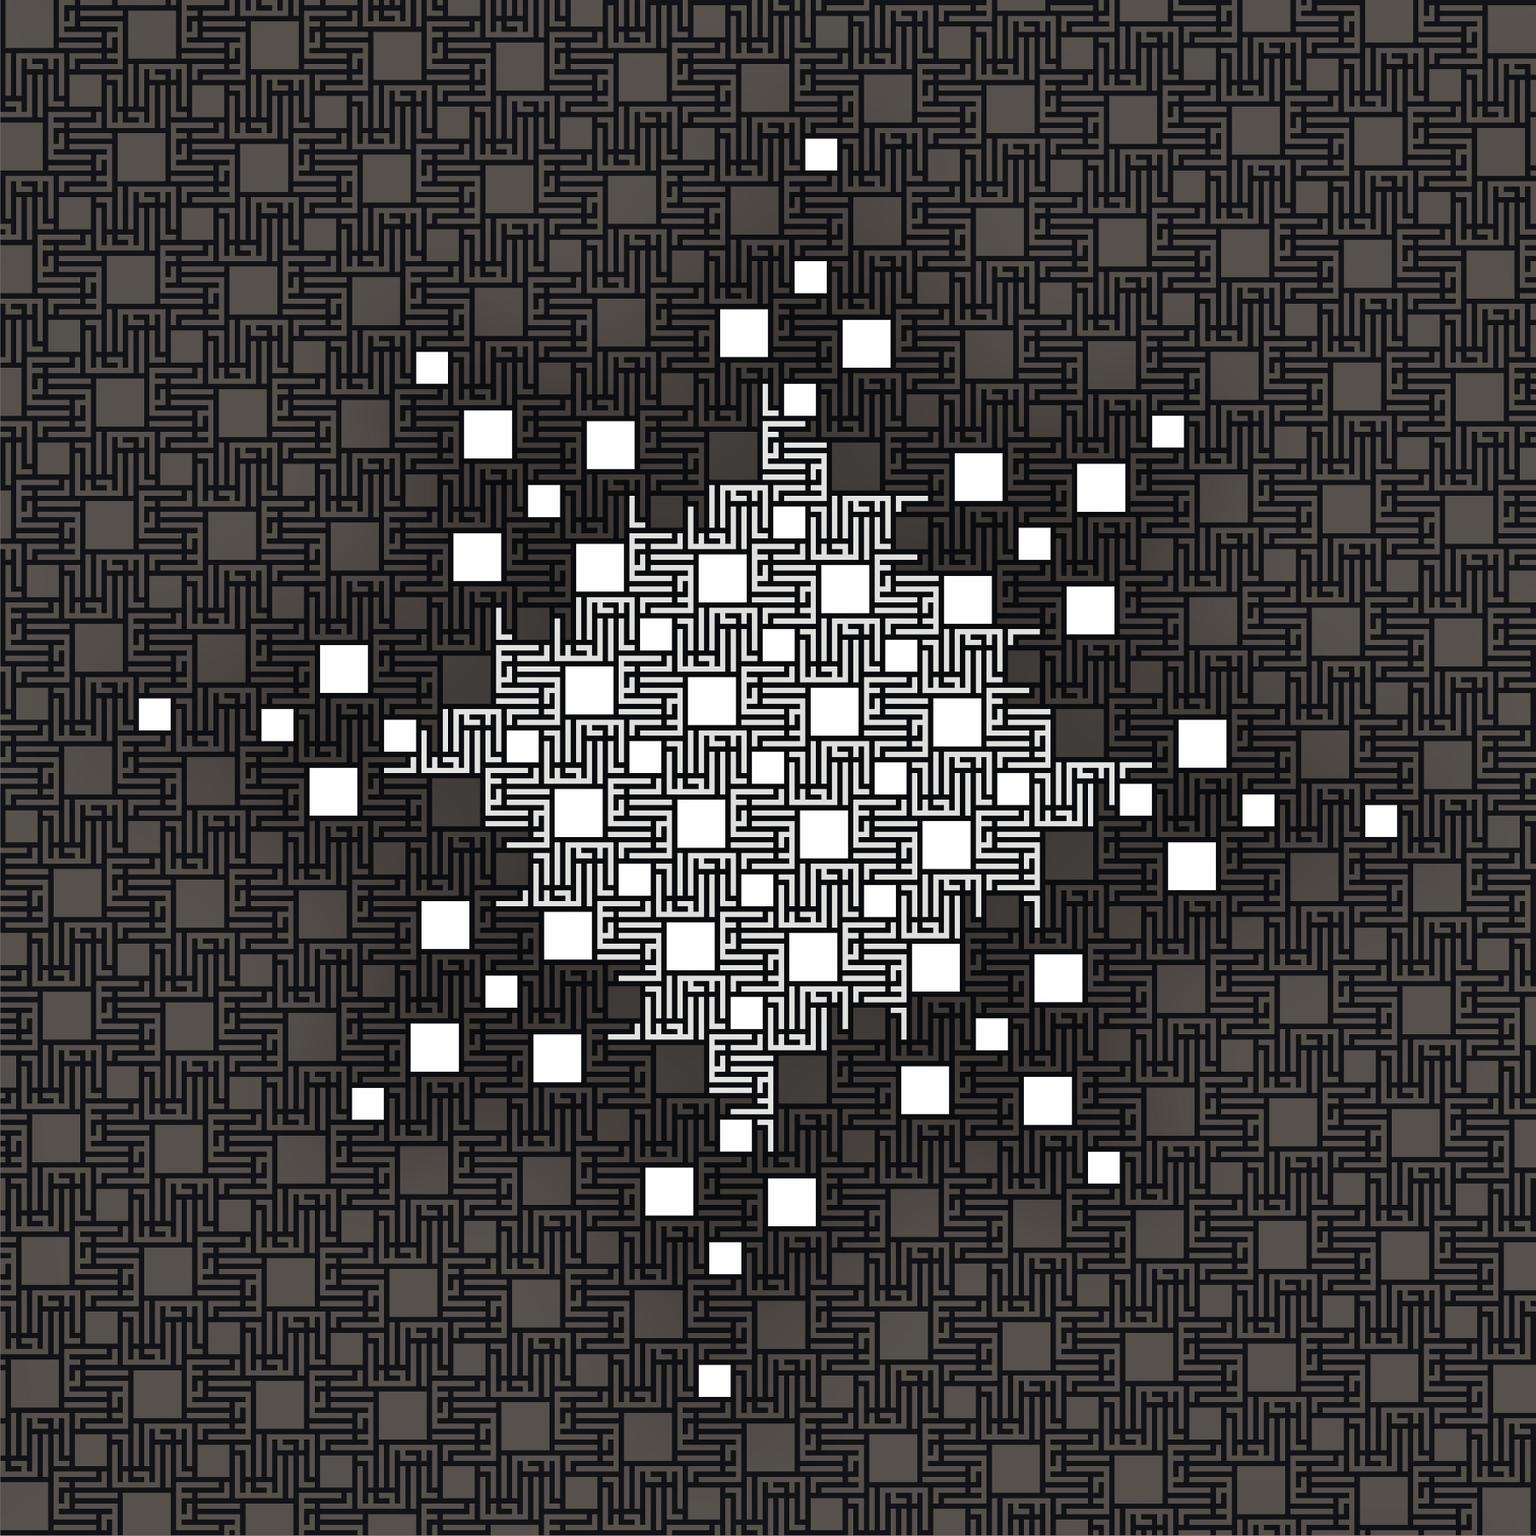 Image for entry 'White Snowflake - Al Jabbaar, The Irresistible (Islamic calligraphic tessellation)'